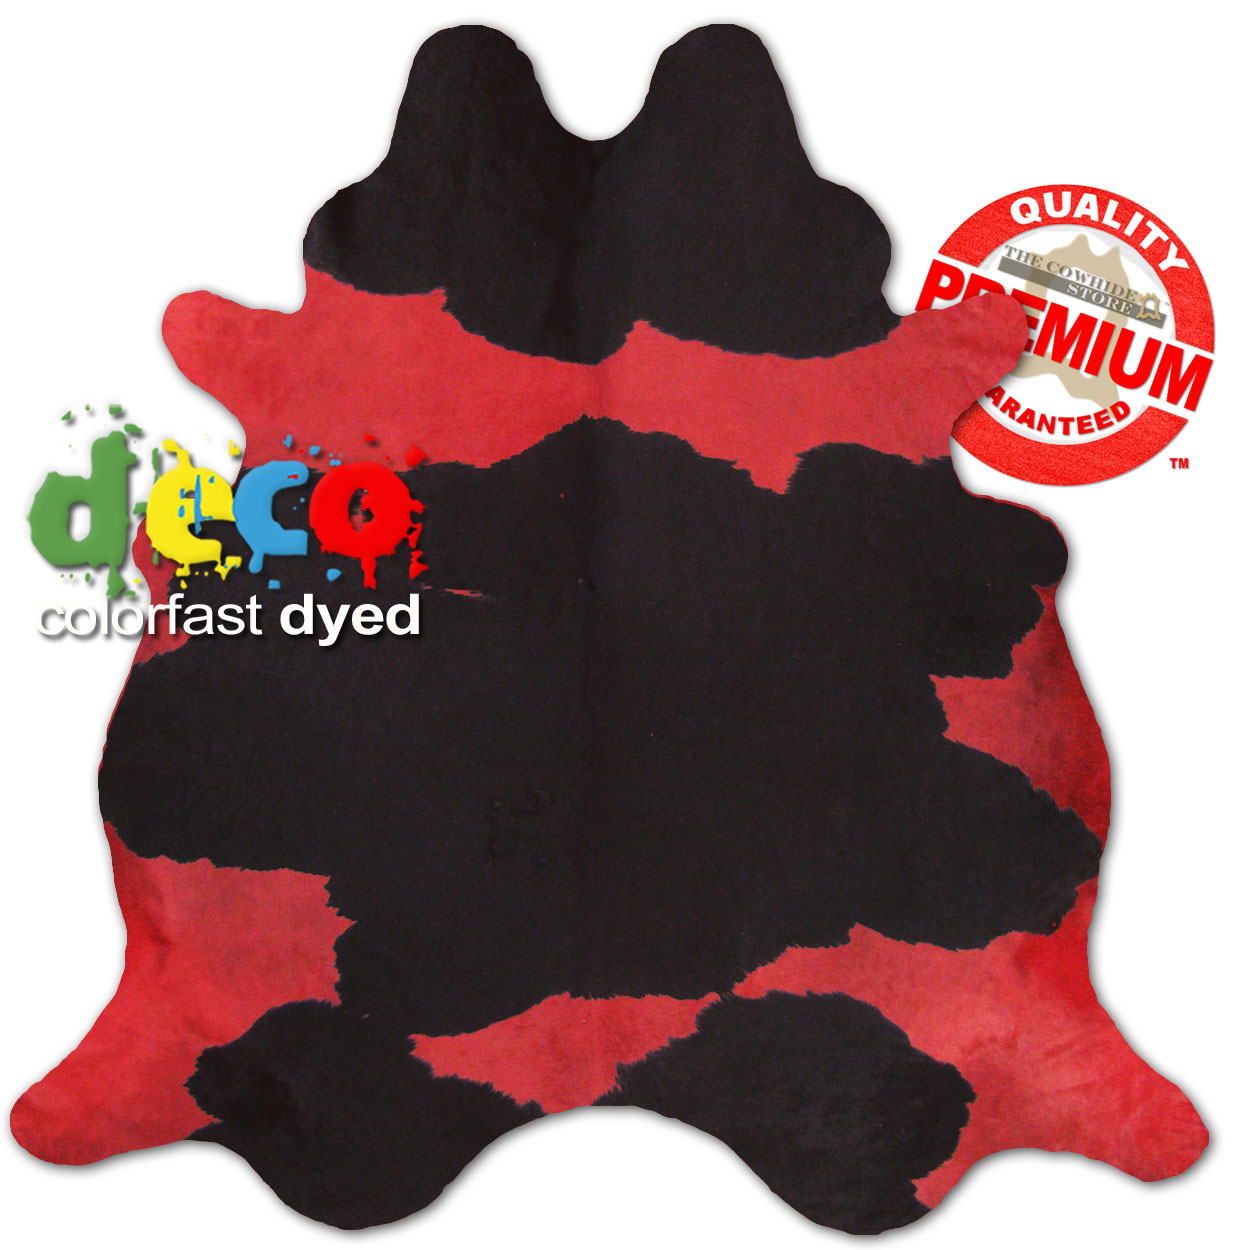 322520 - Colorfast Dyed Spotted on Red Cowhide - Choose Size